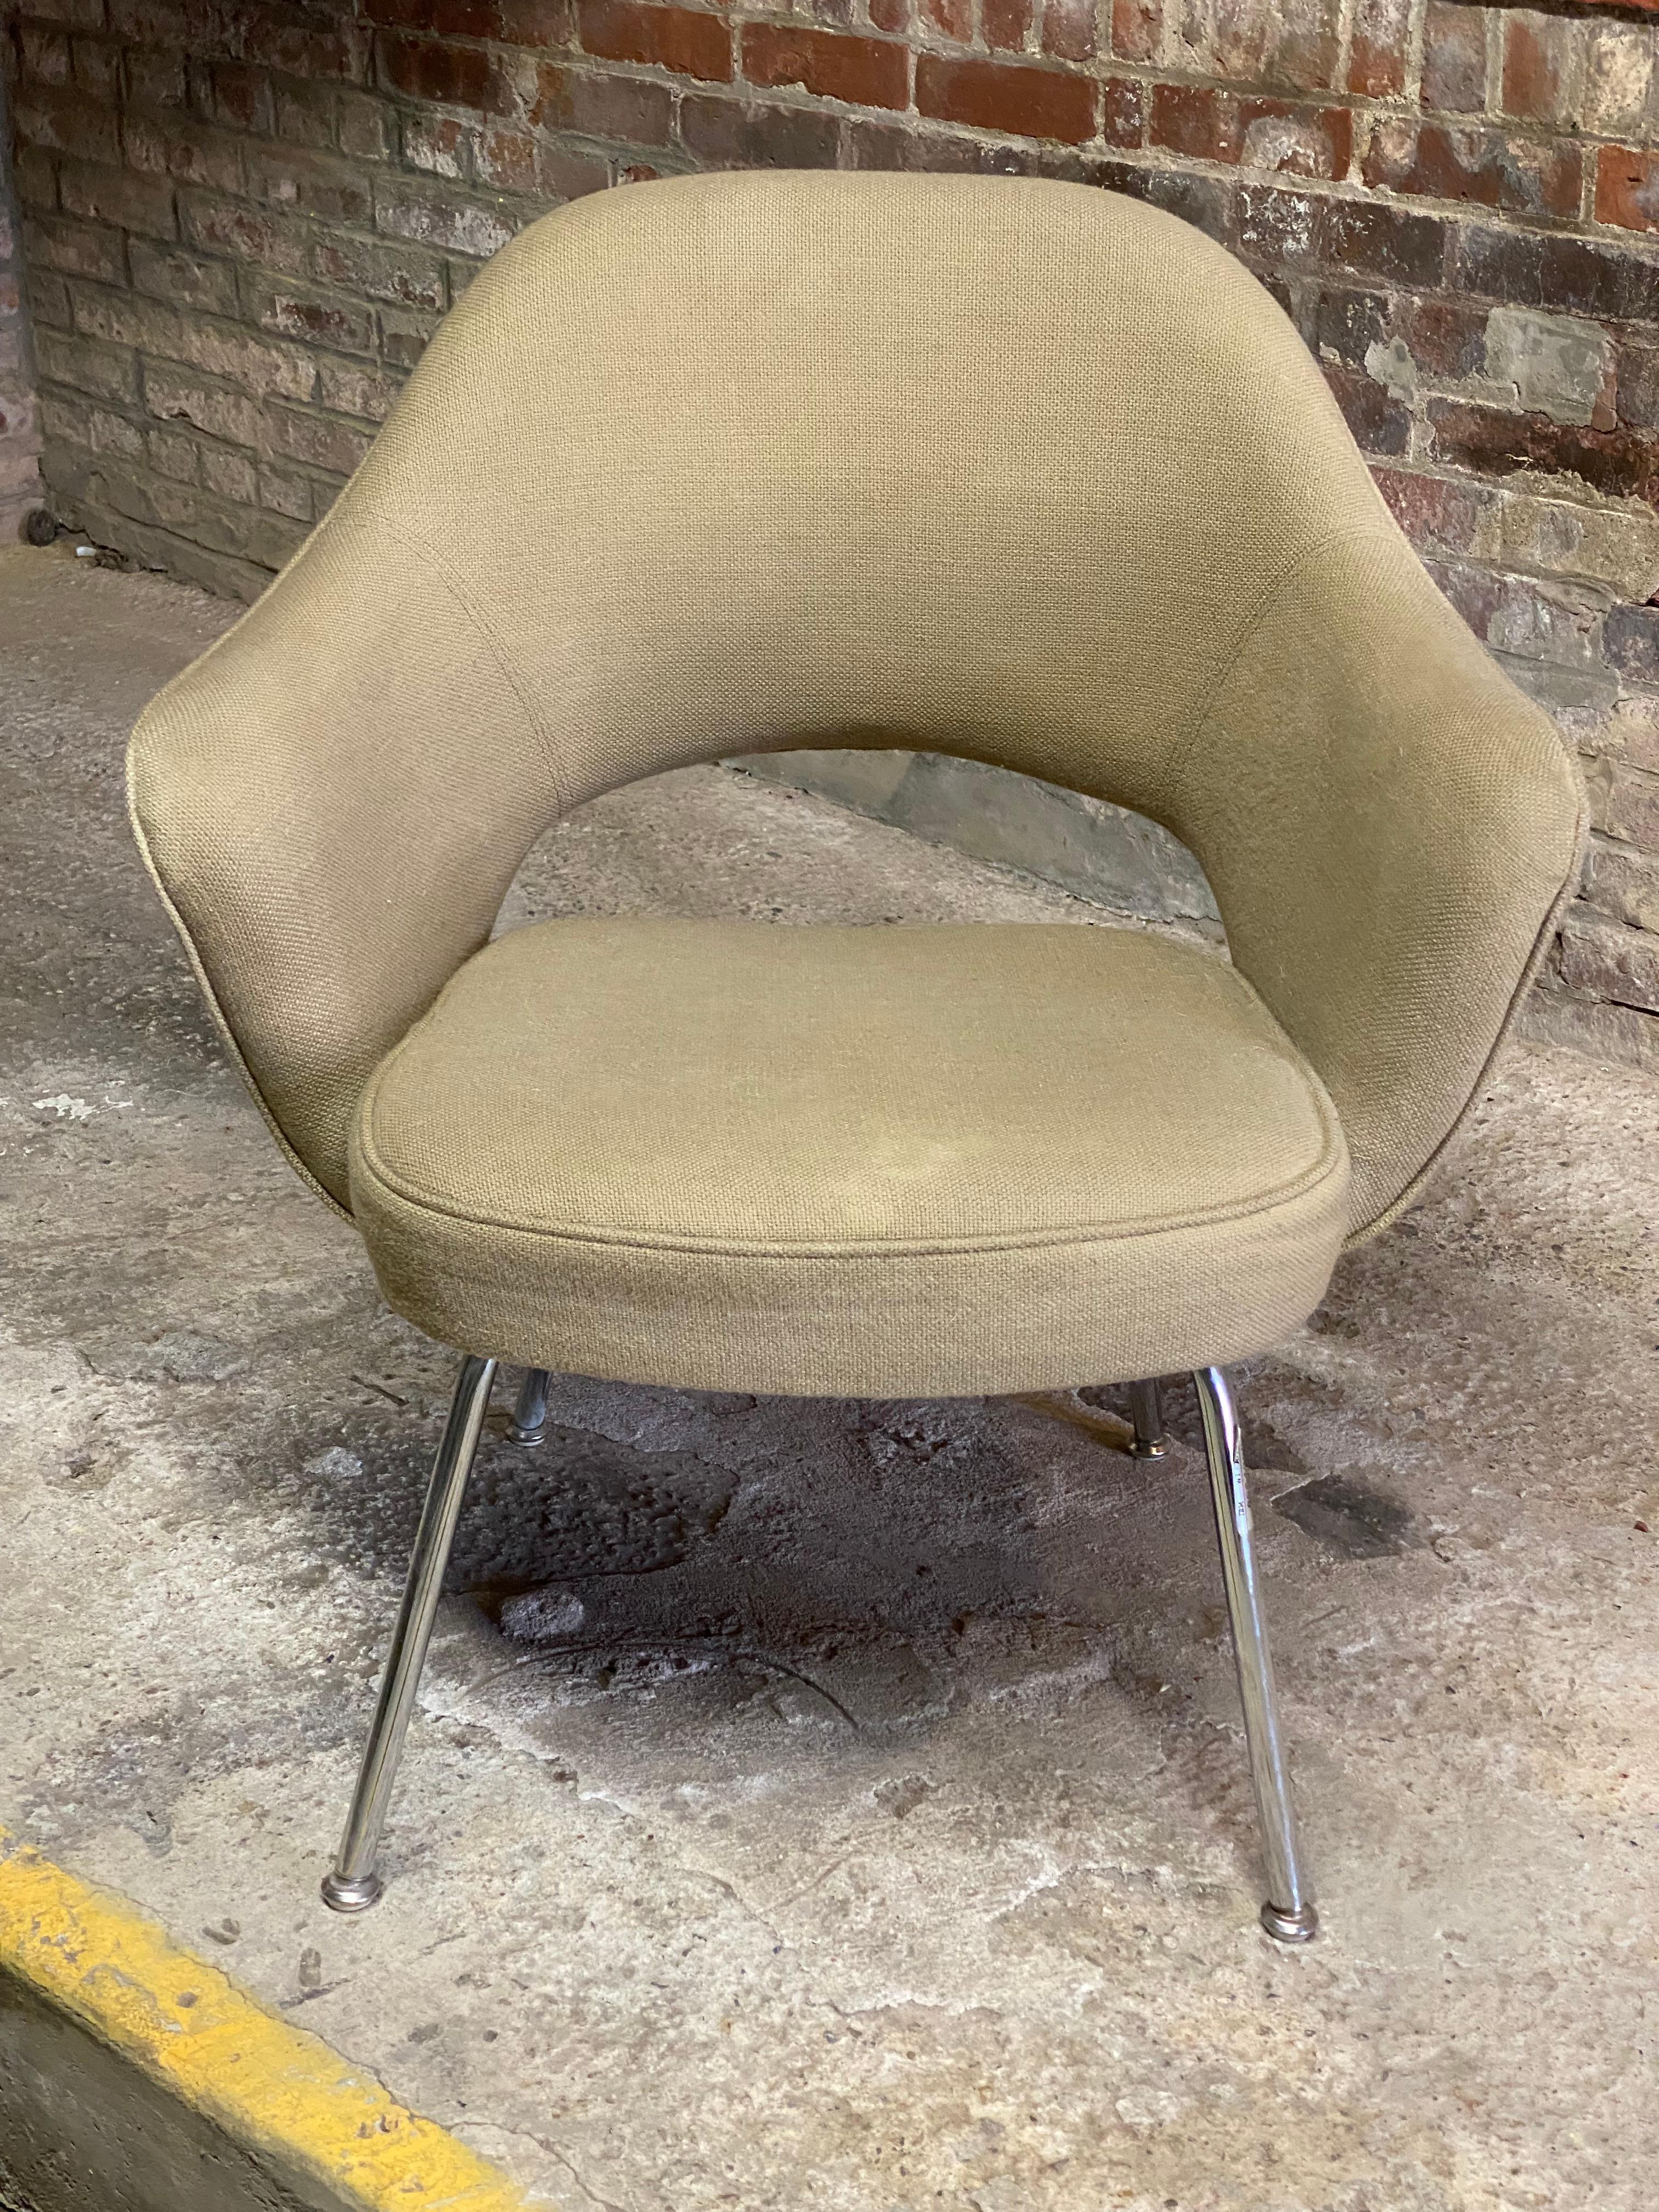 A nice example of a Eero Saarinen Model 71 Executive armchair fro Knoll International. This particular chair came directly from the IBM offices in the Poughkeepsie, New York campus. Circa 1970. Signed on the bottom with the Knoll International label